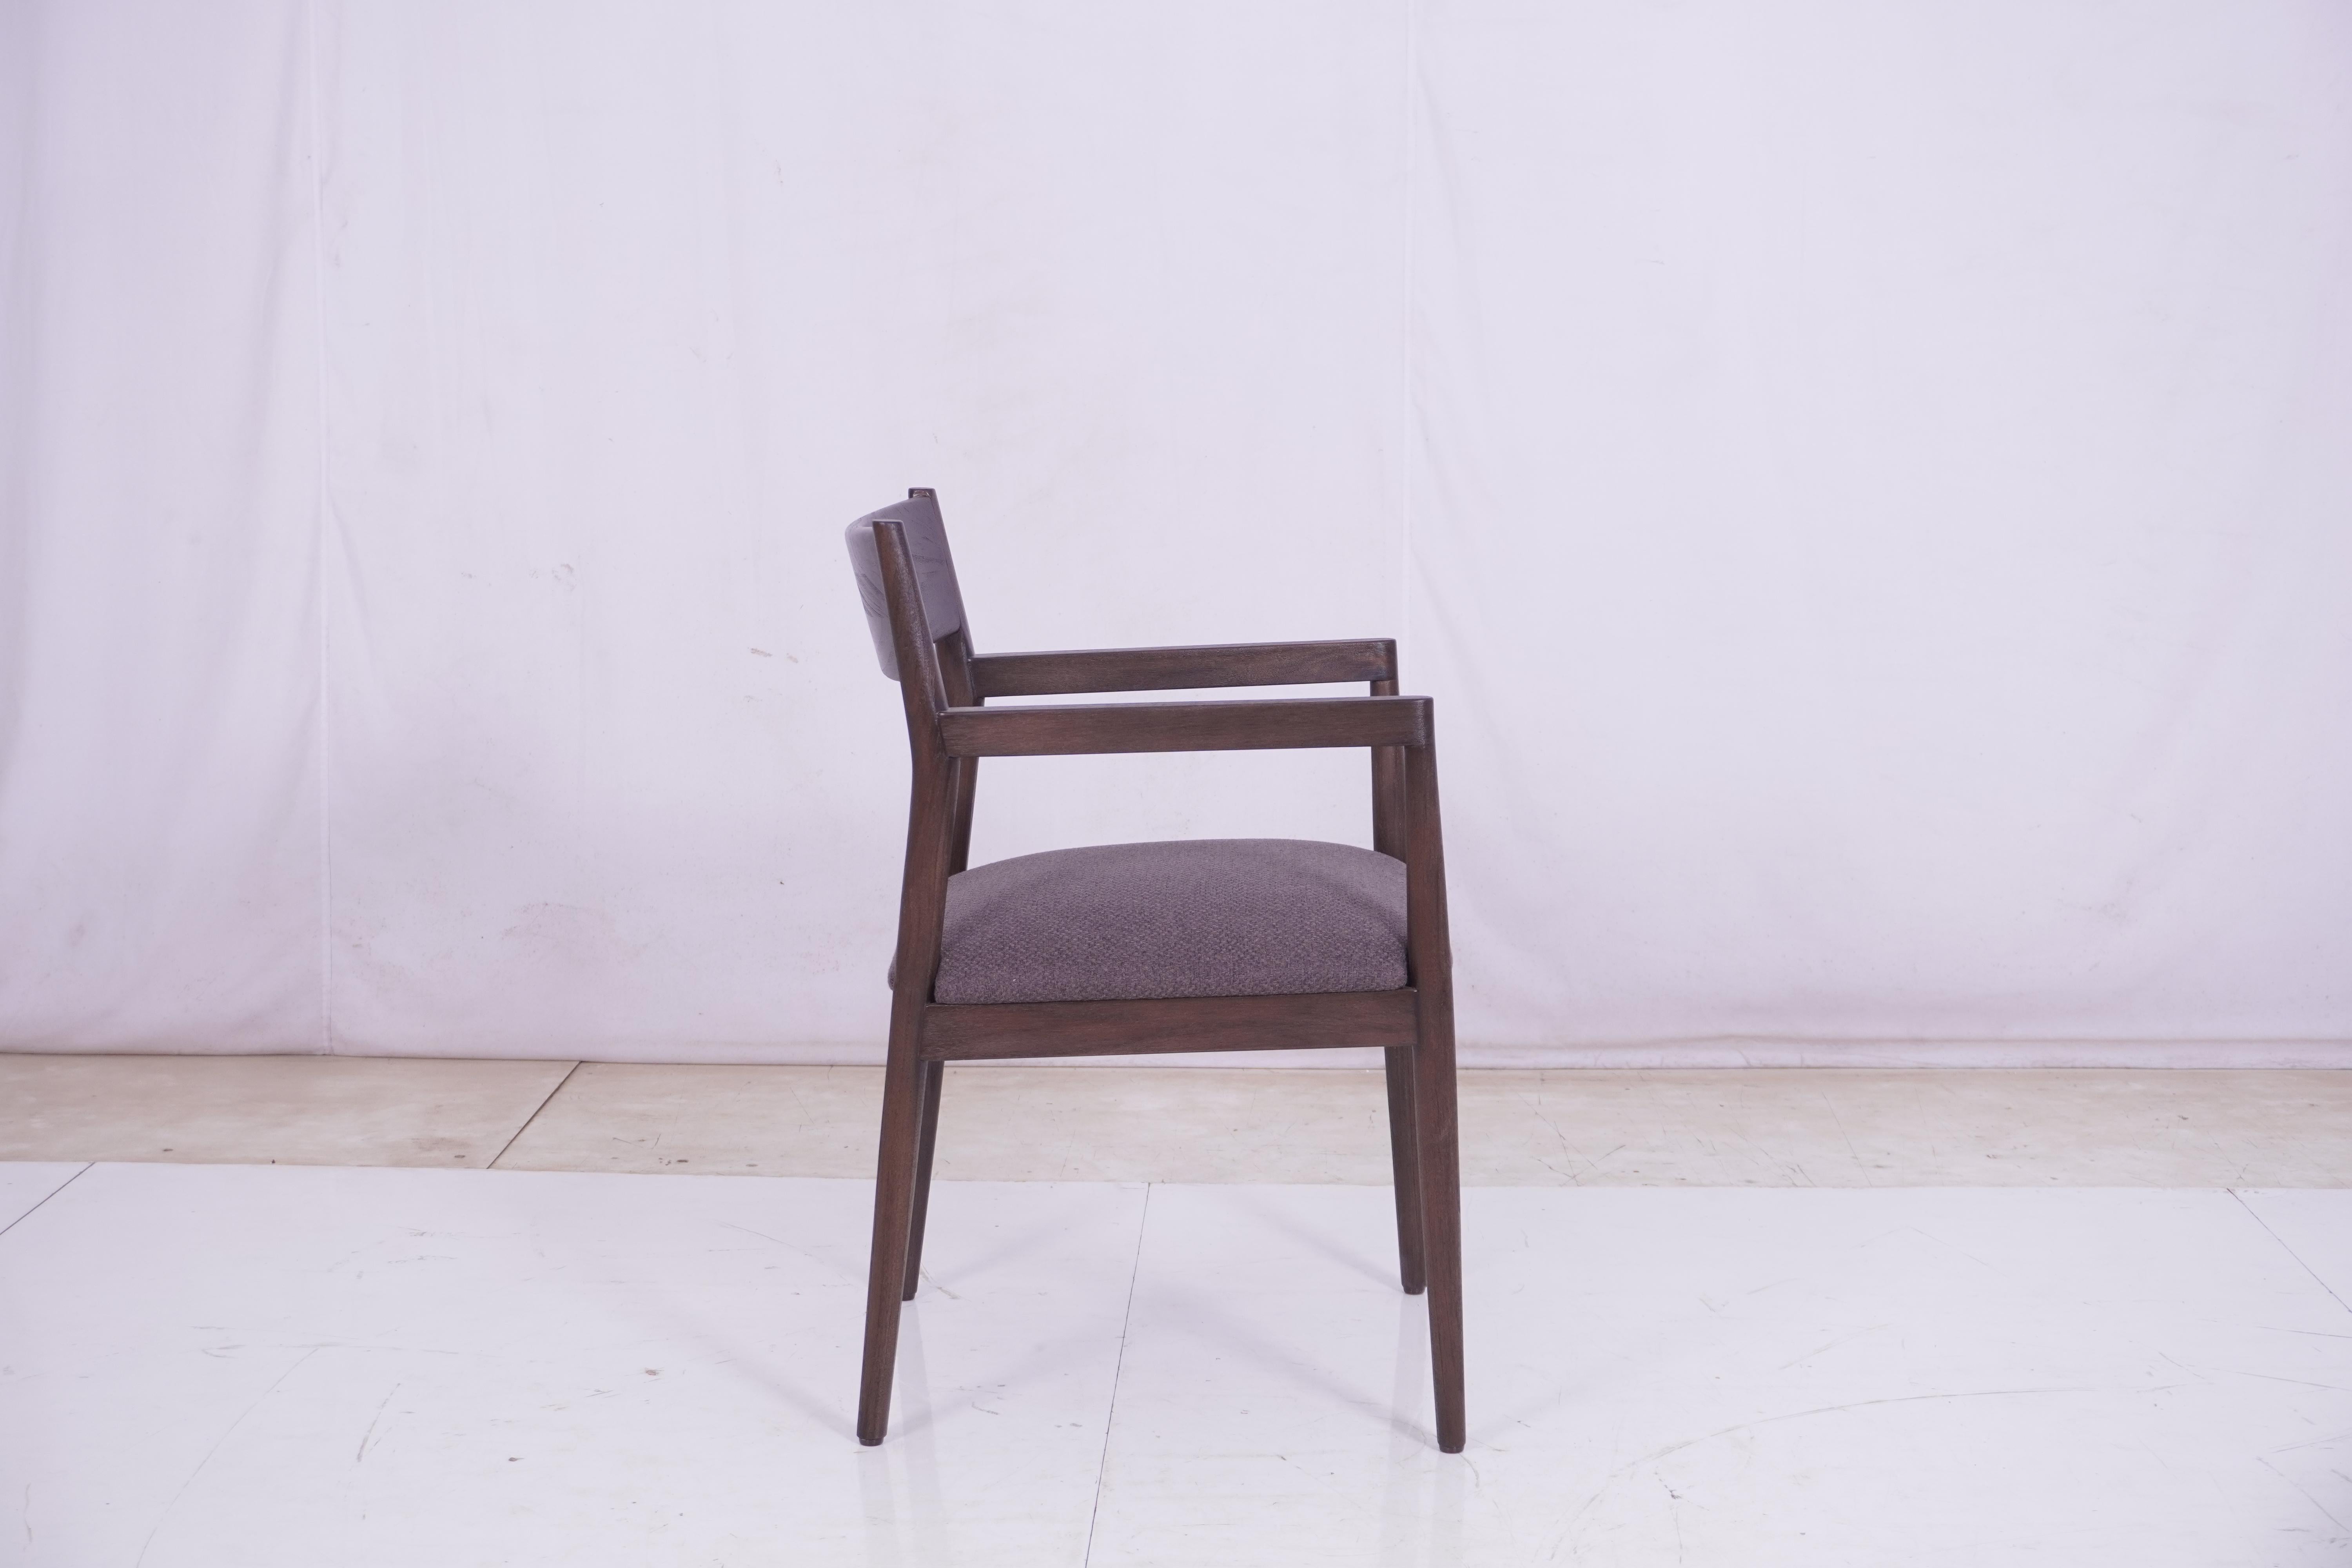 Javanese Harper Dining Chair Armchair, Teak Wood in a Walnut Finish. Set of 6 chairs For Sale